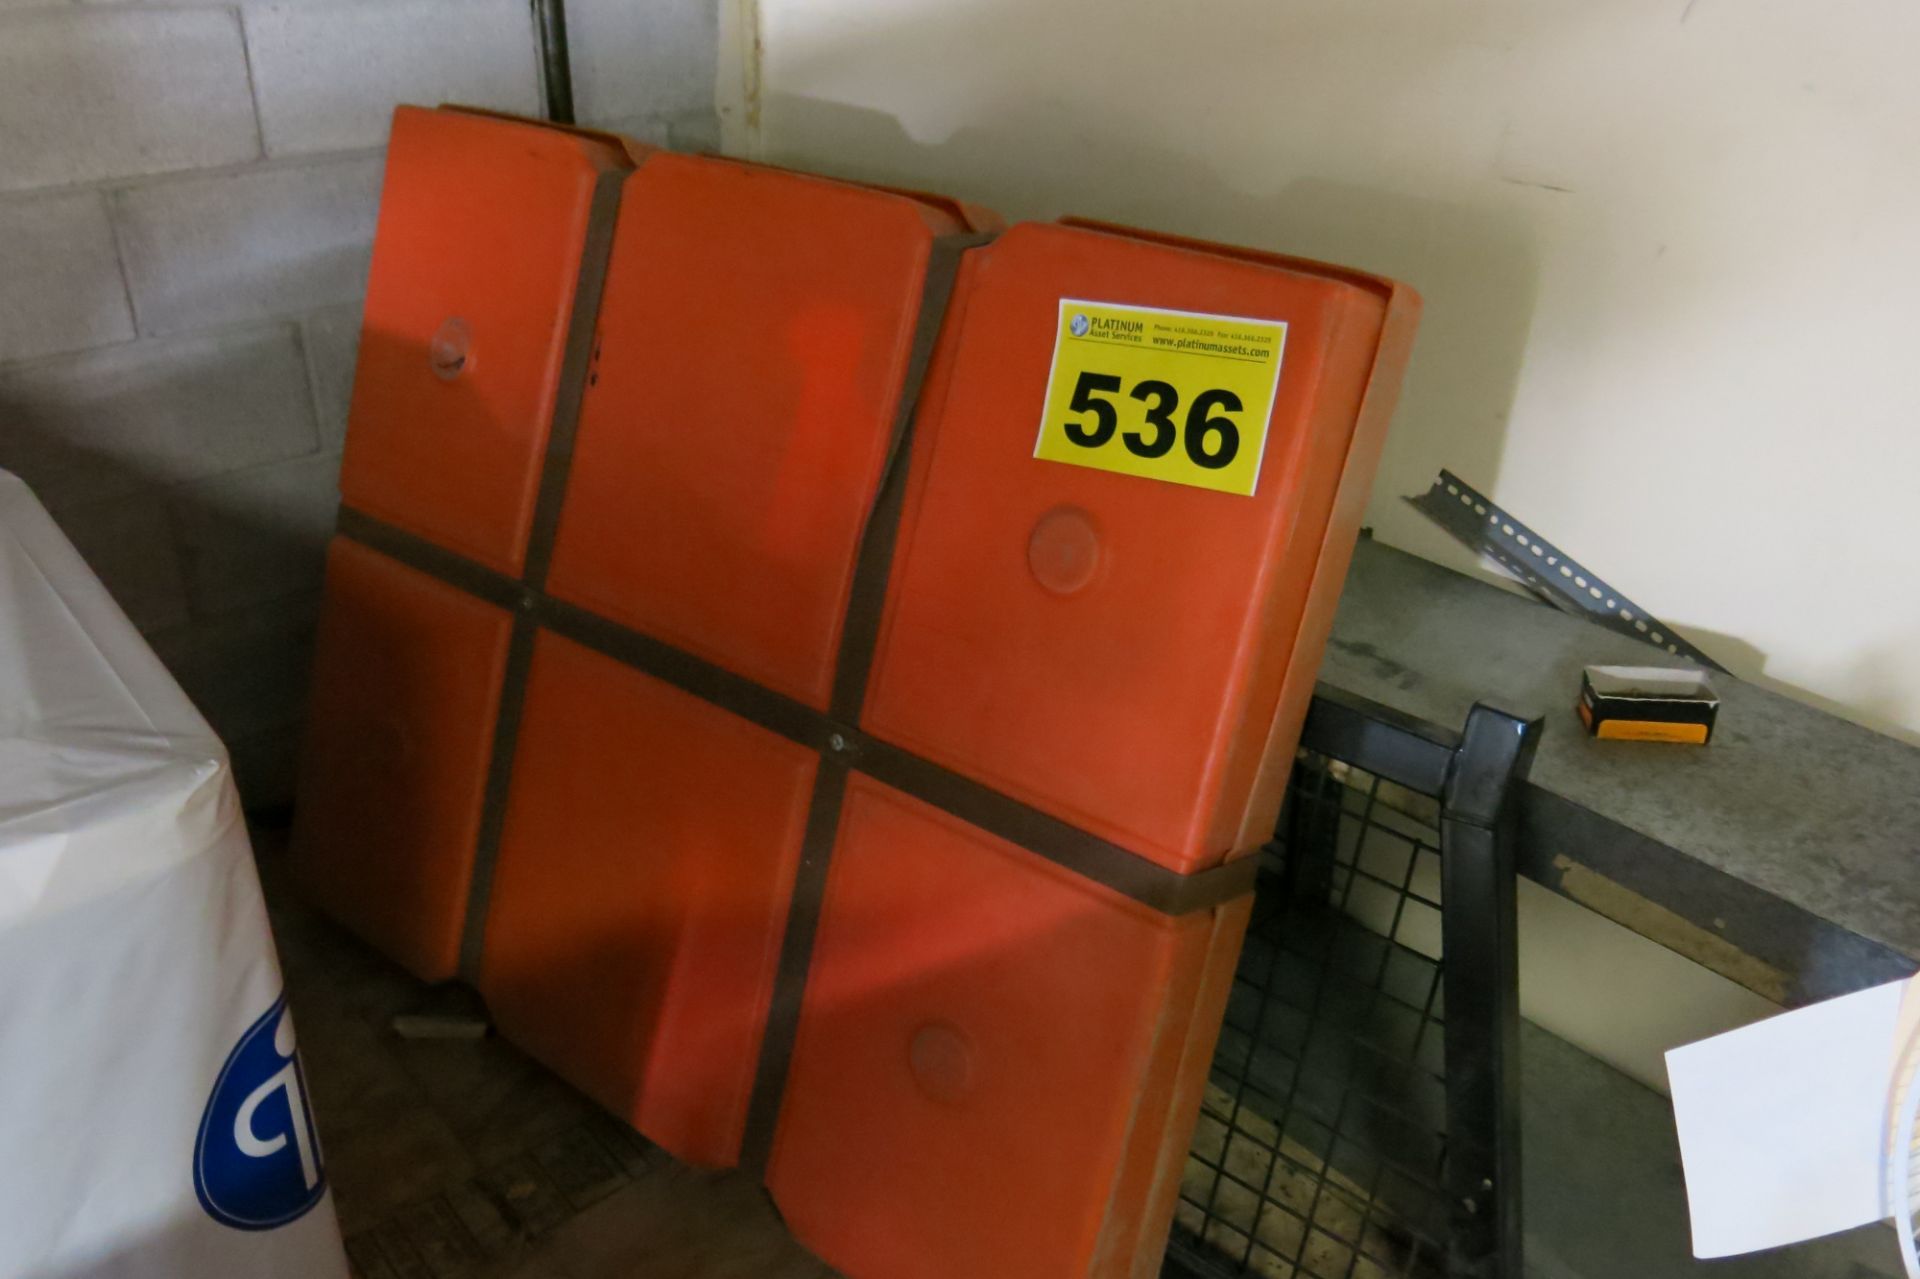 ORANGE STORAGE CASE WITH CONTENTS (LOCATED IN MISSISSAUGA)